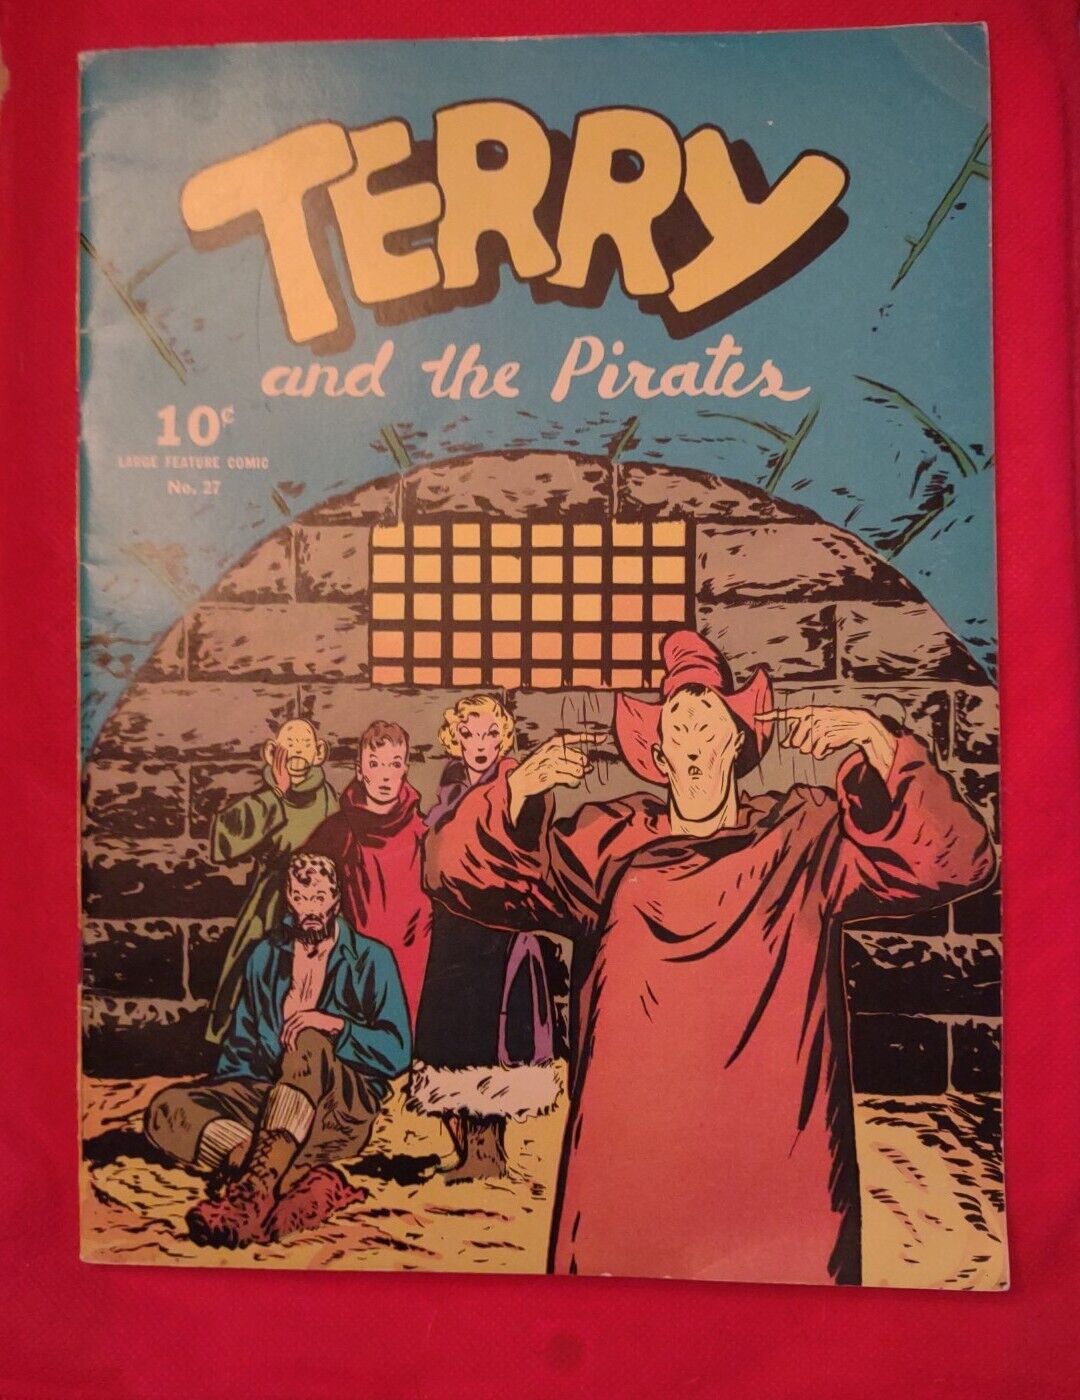 Terry and the Pirates Large Feature Comic #27 (Dell 1941) G Milton Caniff